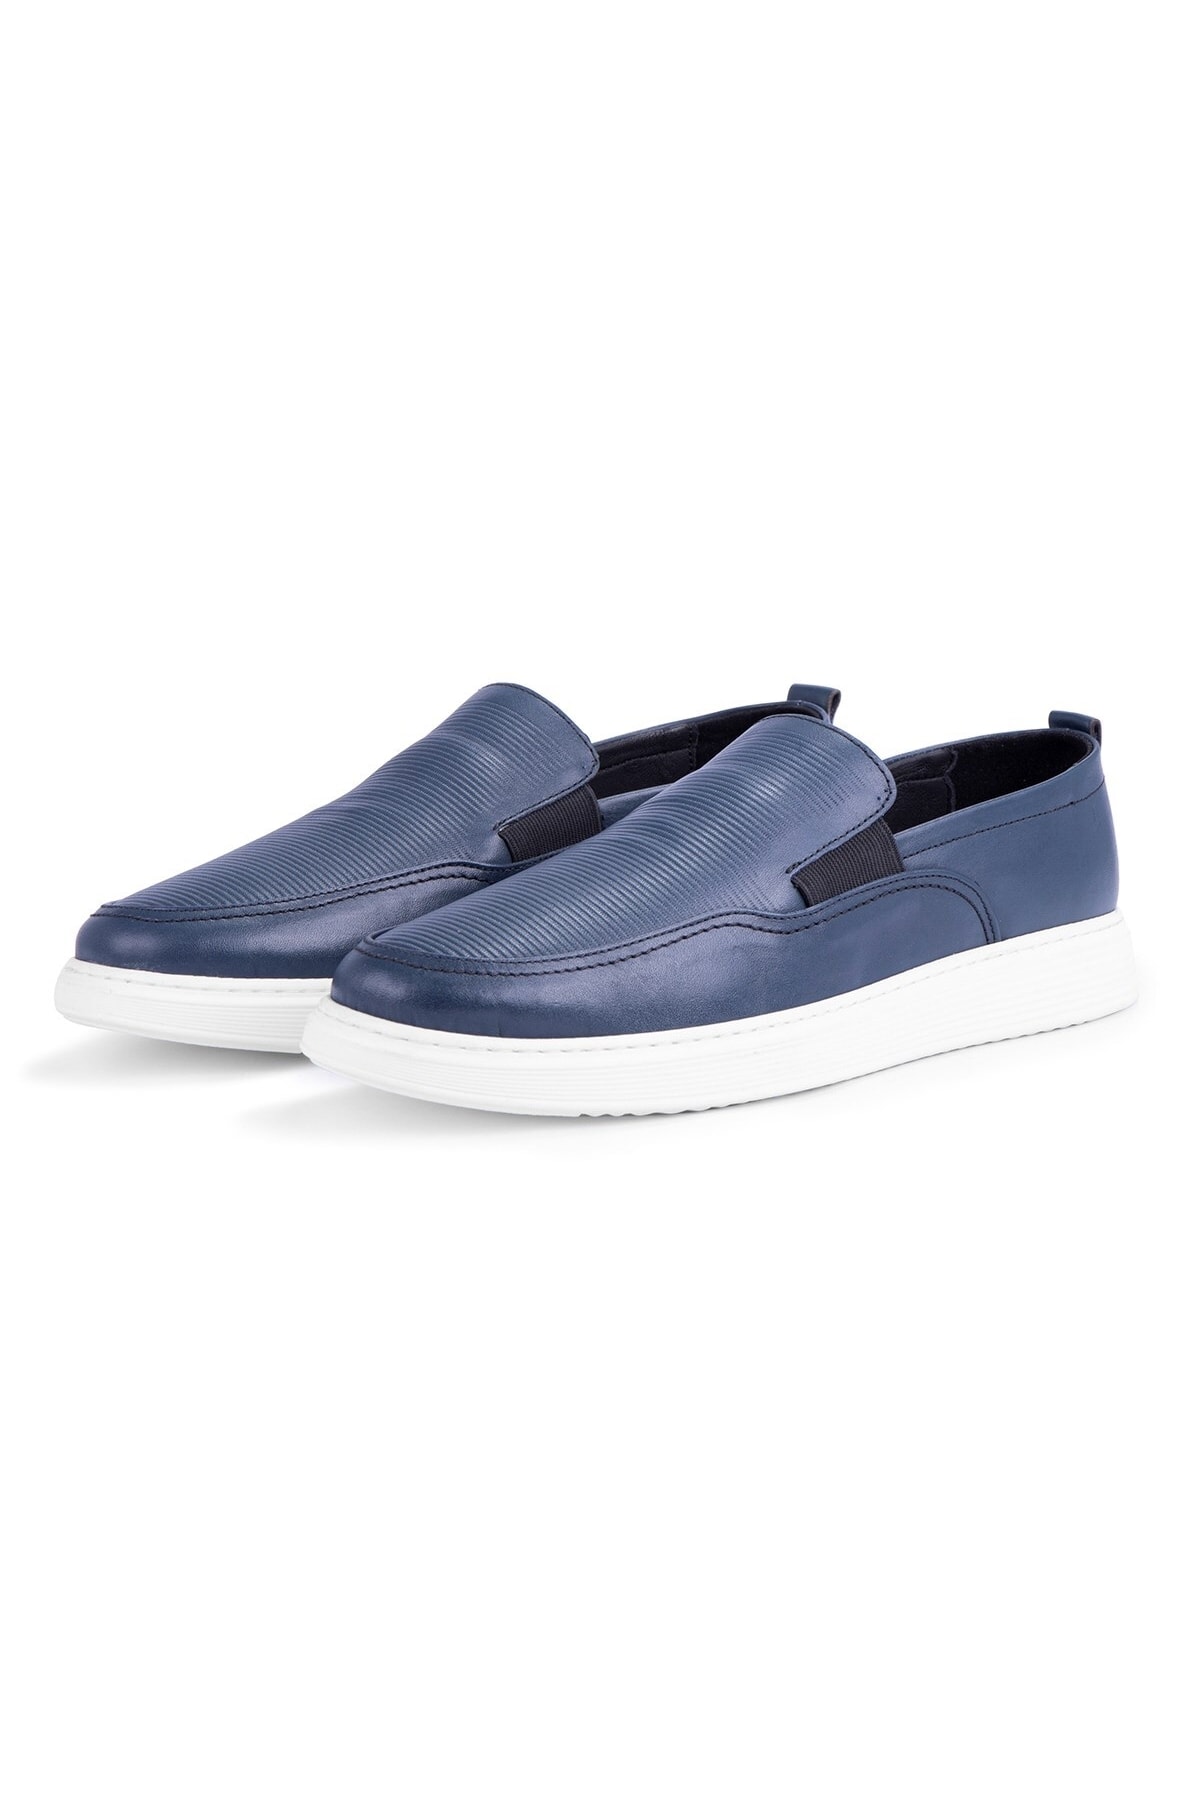 Ducavelli Seon Genuine Leather Men's Casual Shoes, Loafers, Summer Shoes, Light Shoes Navy Blue.